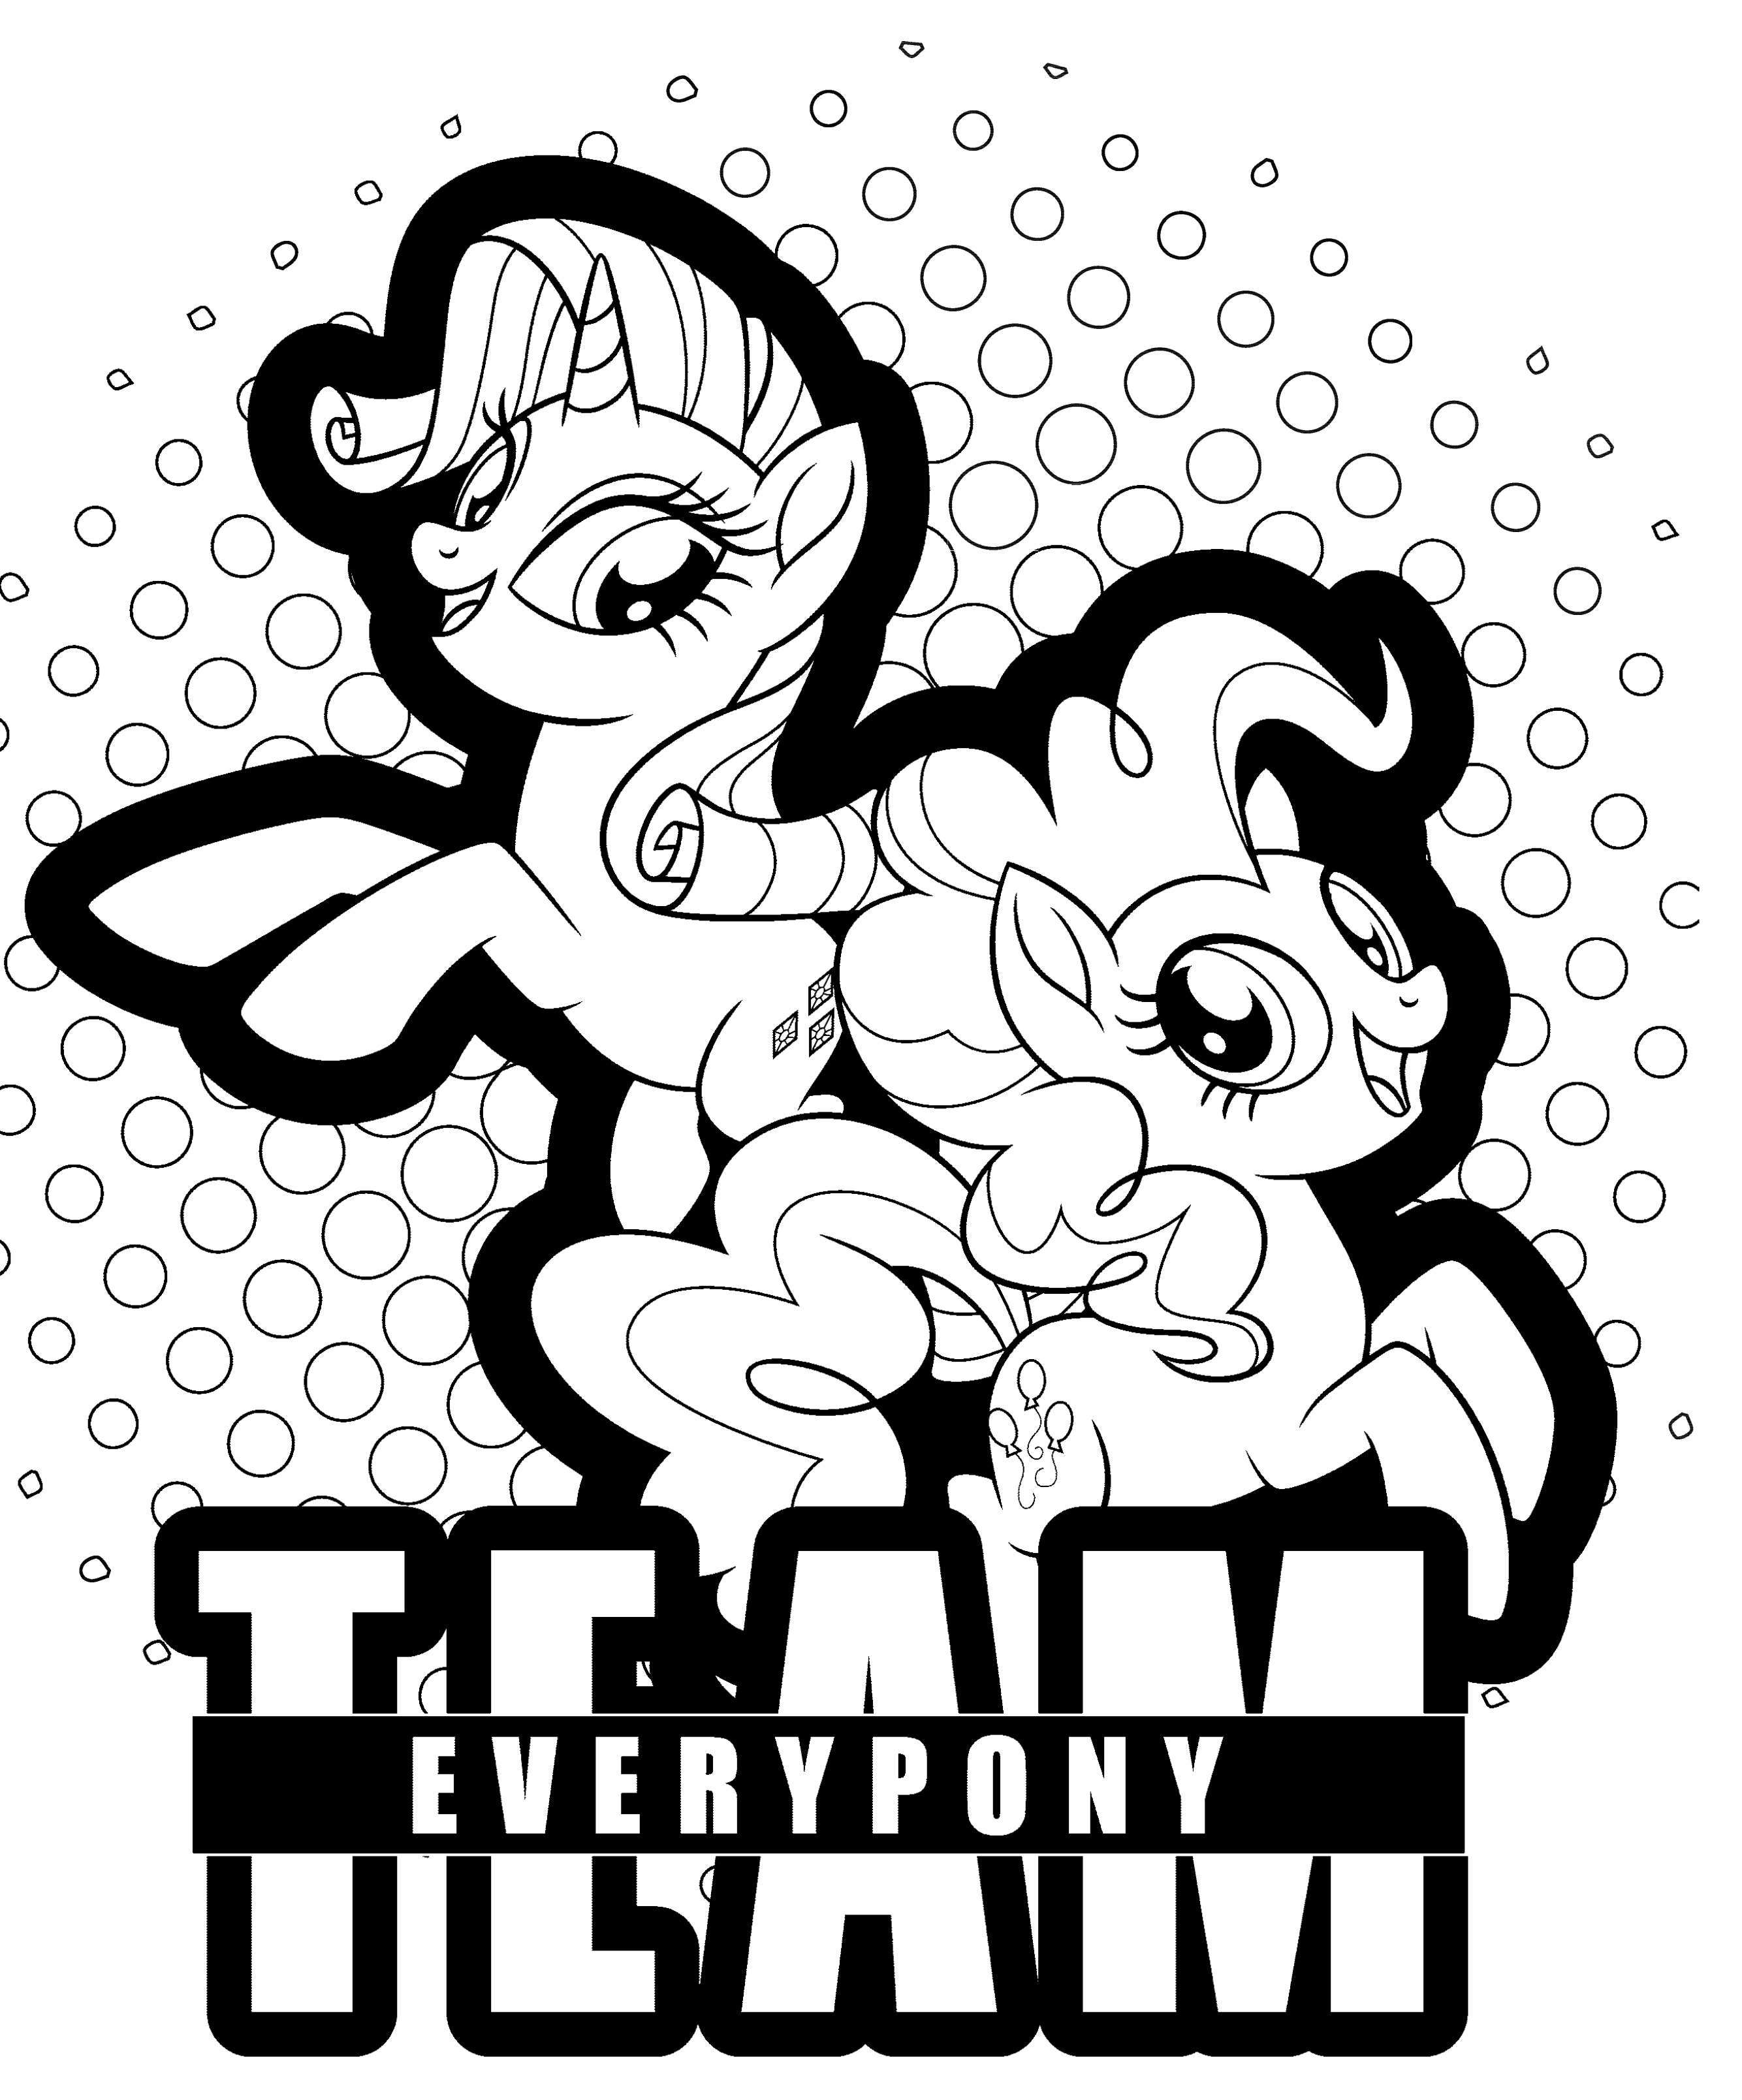 My Little Pony The Movie Coloring Pages Youloveit Com Nightmare moon, my little pony. youloveit com